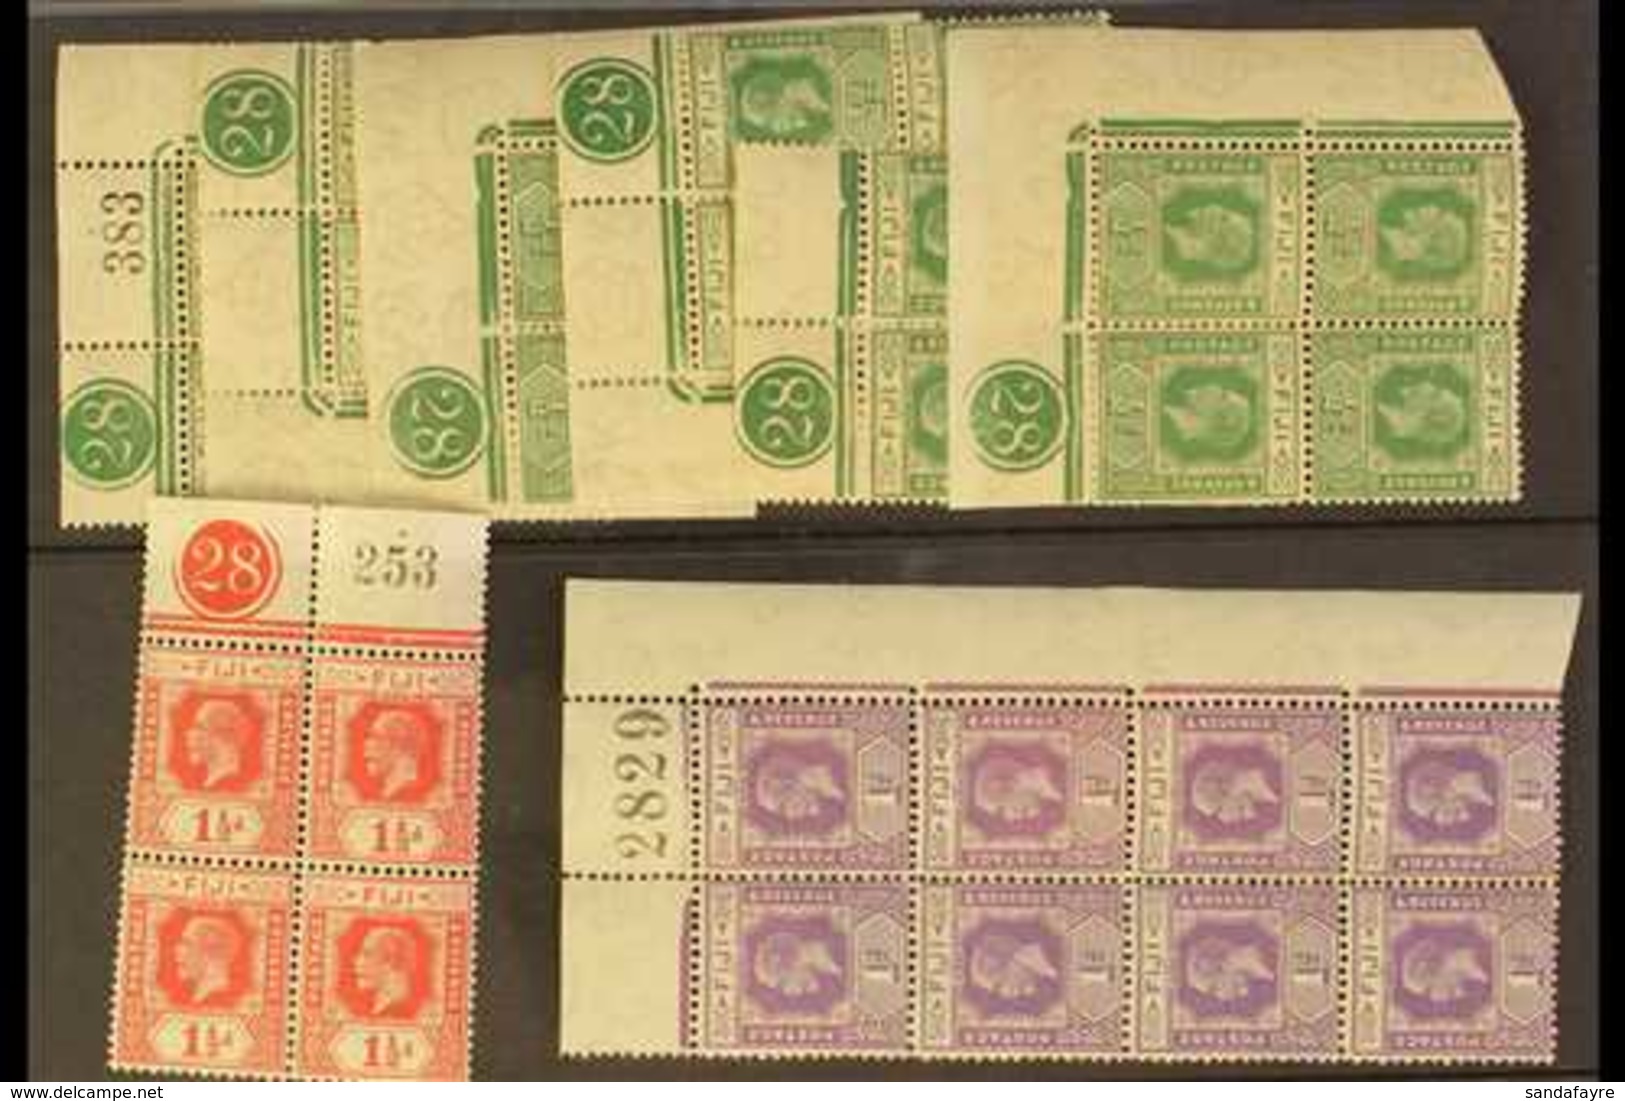 1922-27 Wmk Script CA Group Of Mint Blocks With Sheet Selvage, Plate Numbers & Sheet Numbers (8 Items = 36 Stamps) For M - Fiji (...-1970)